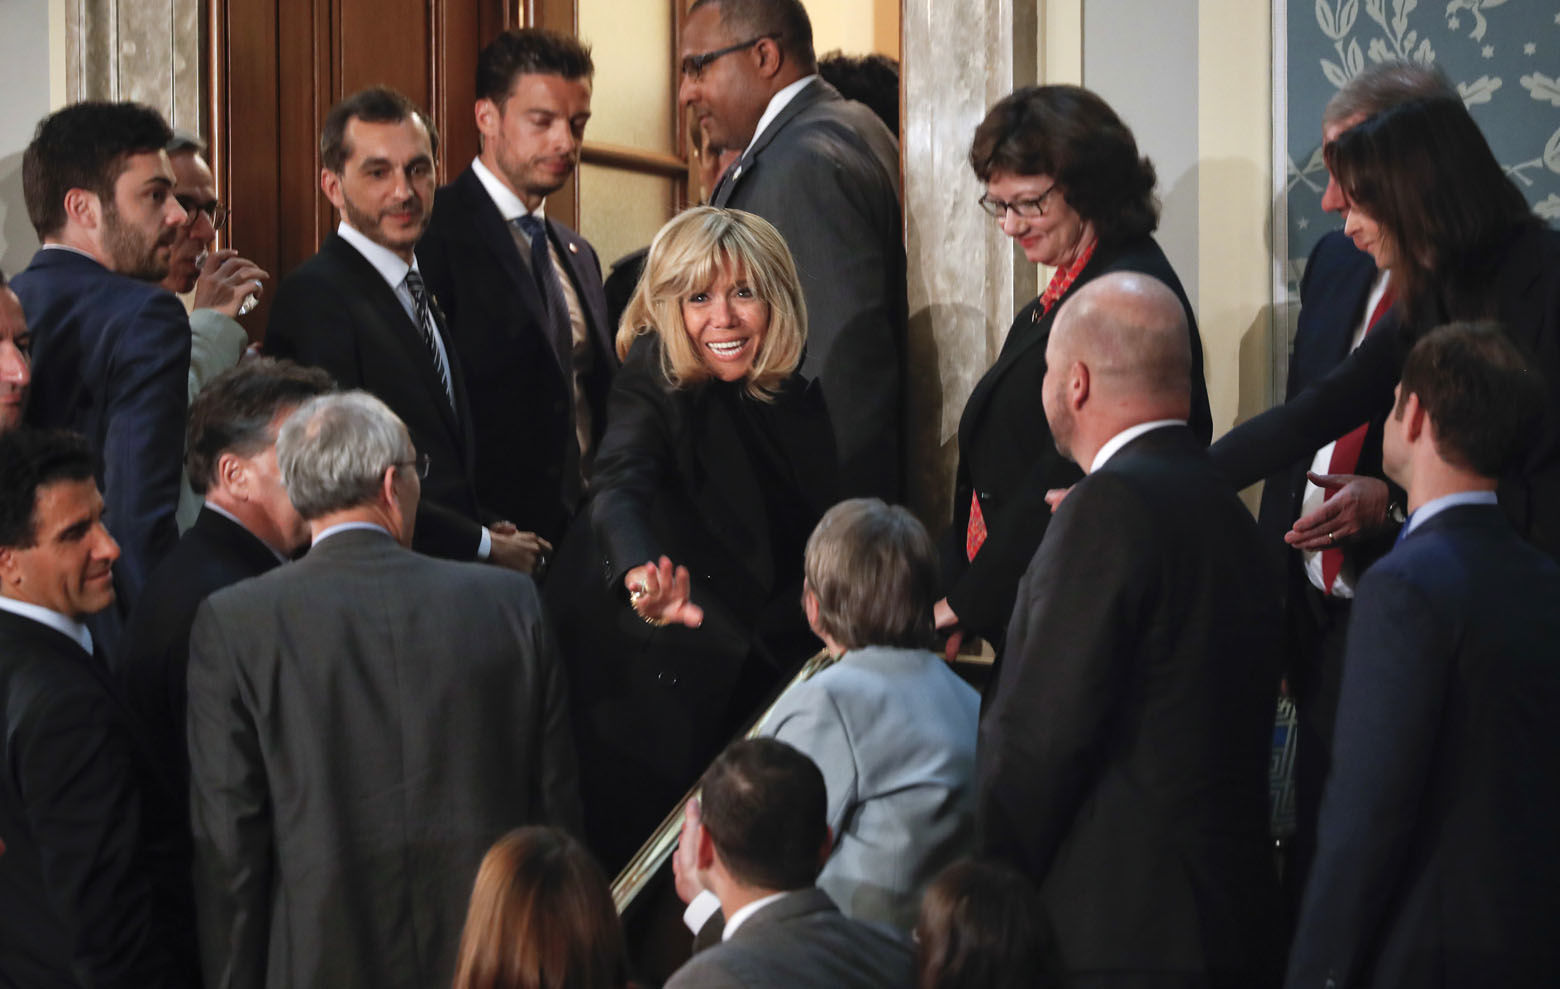 Brigitte Macron, center, wife of French President Emmanuel Macron, waves to guests as she prepares to leave after her husband's address to a joint meeting of Congress on Capitol Hill in Washington, Wednesday, April 25, 2018. (AP Photo/Pablo Martinez Monsivais)